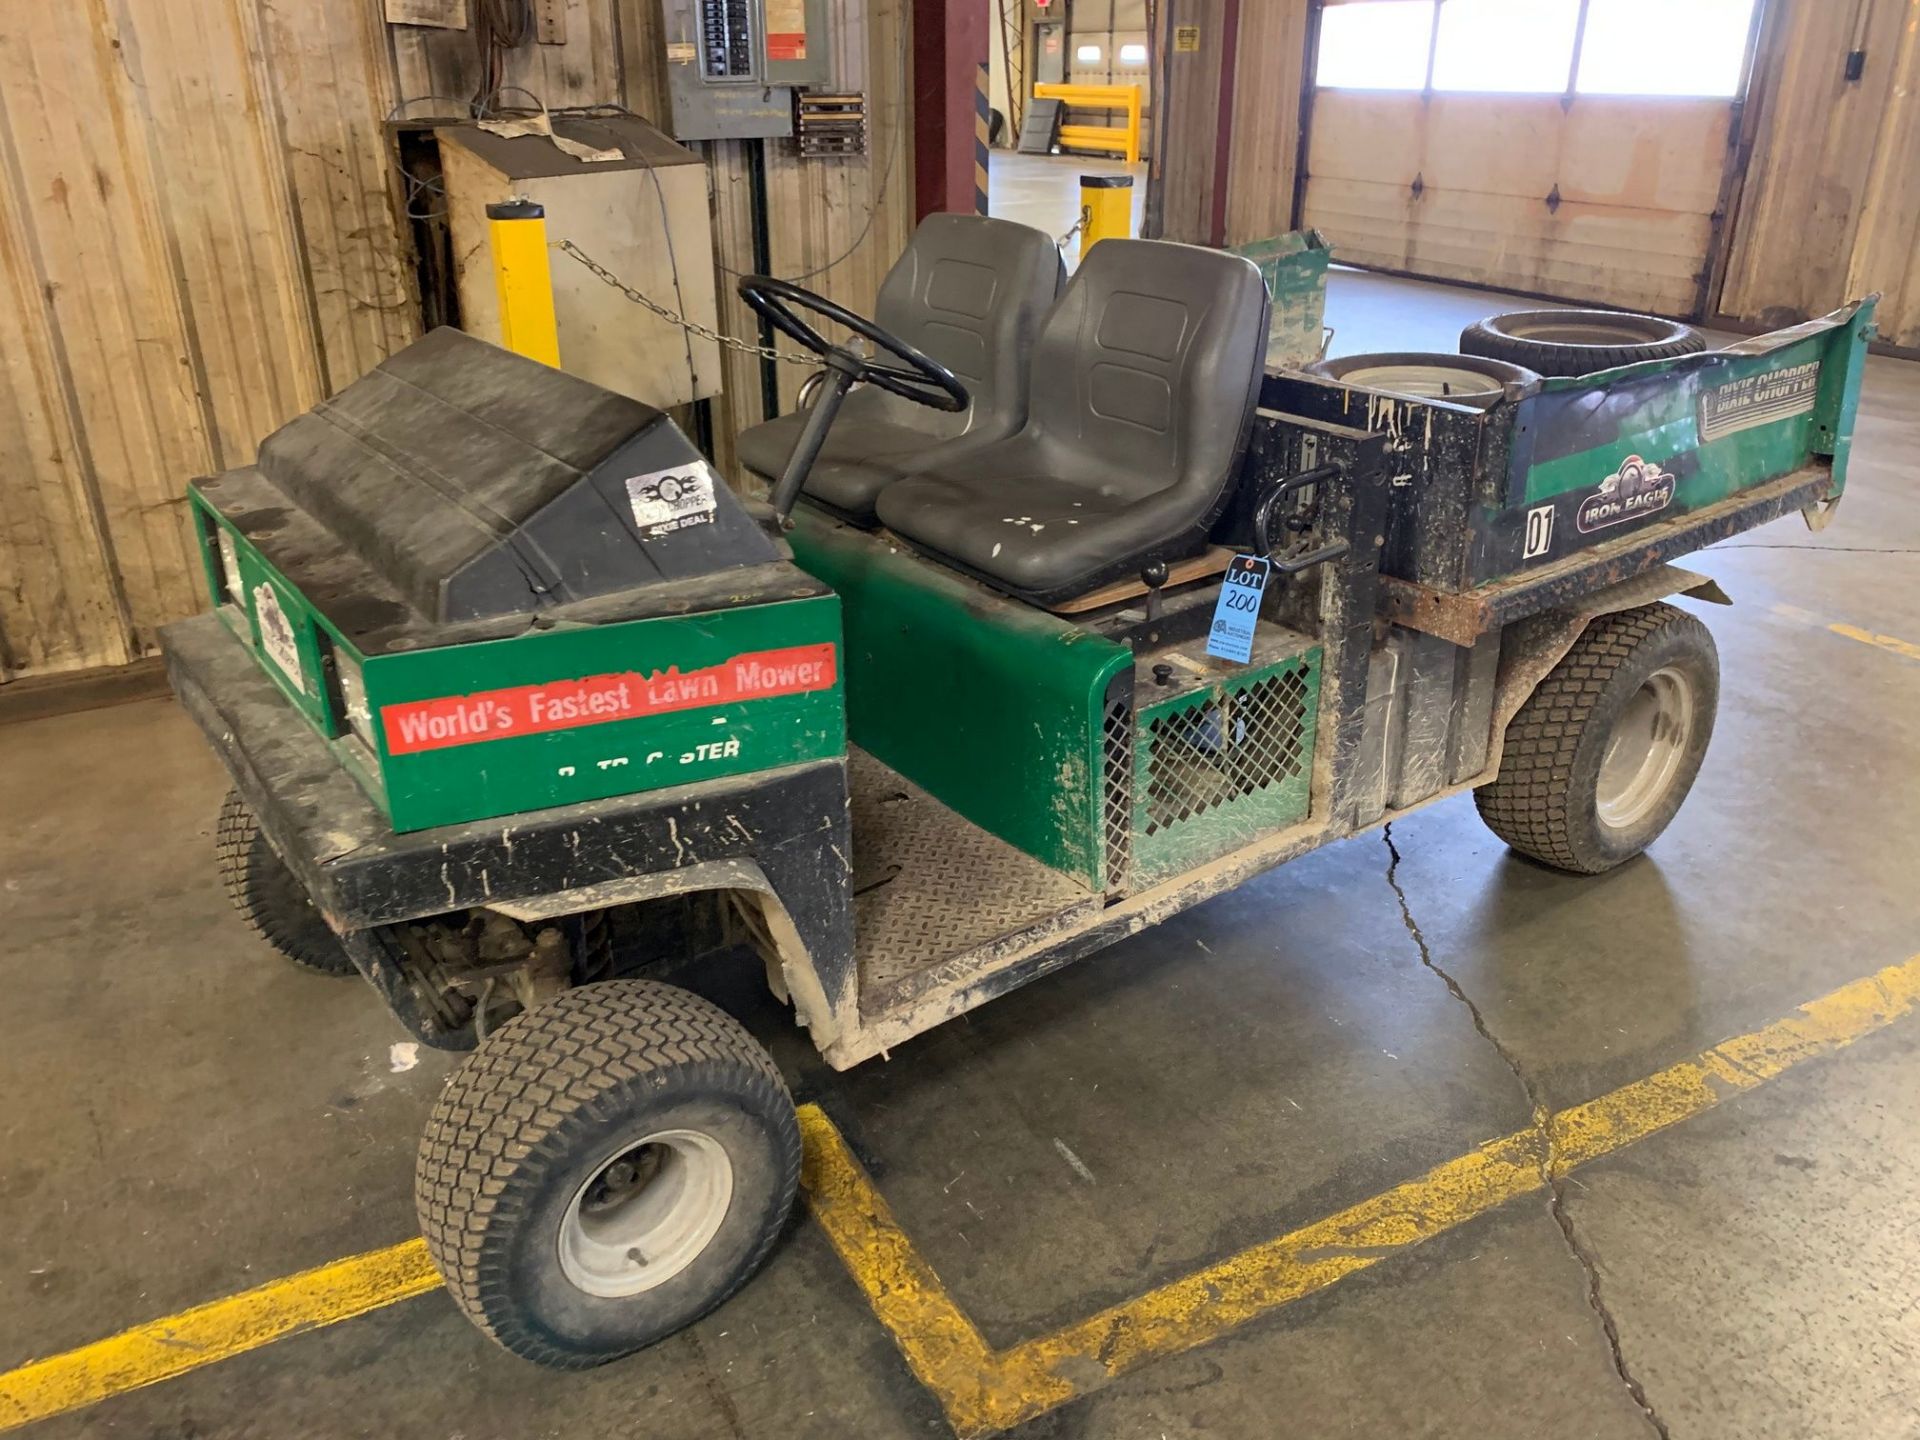 CUSHMAN MODEL 4W JUNIOR TURF GAS POWERED ALL TERRAIN DUMP BED UTILITY VEHICLE **OUT OF SERVICE**